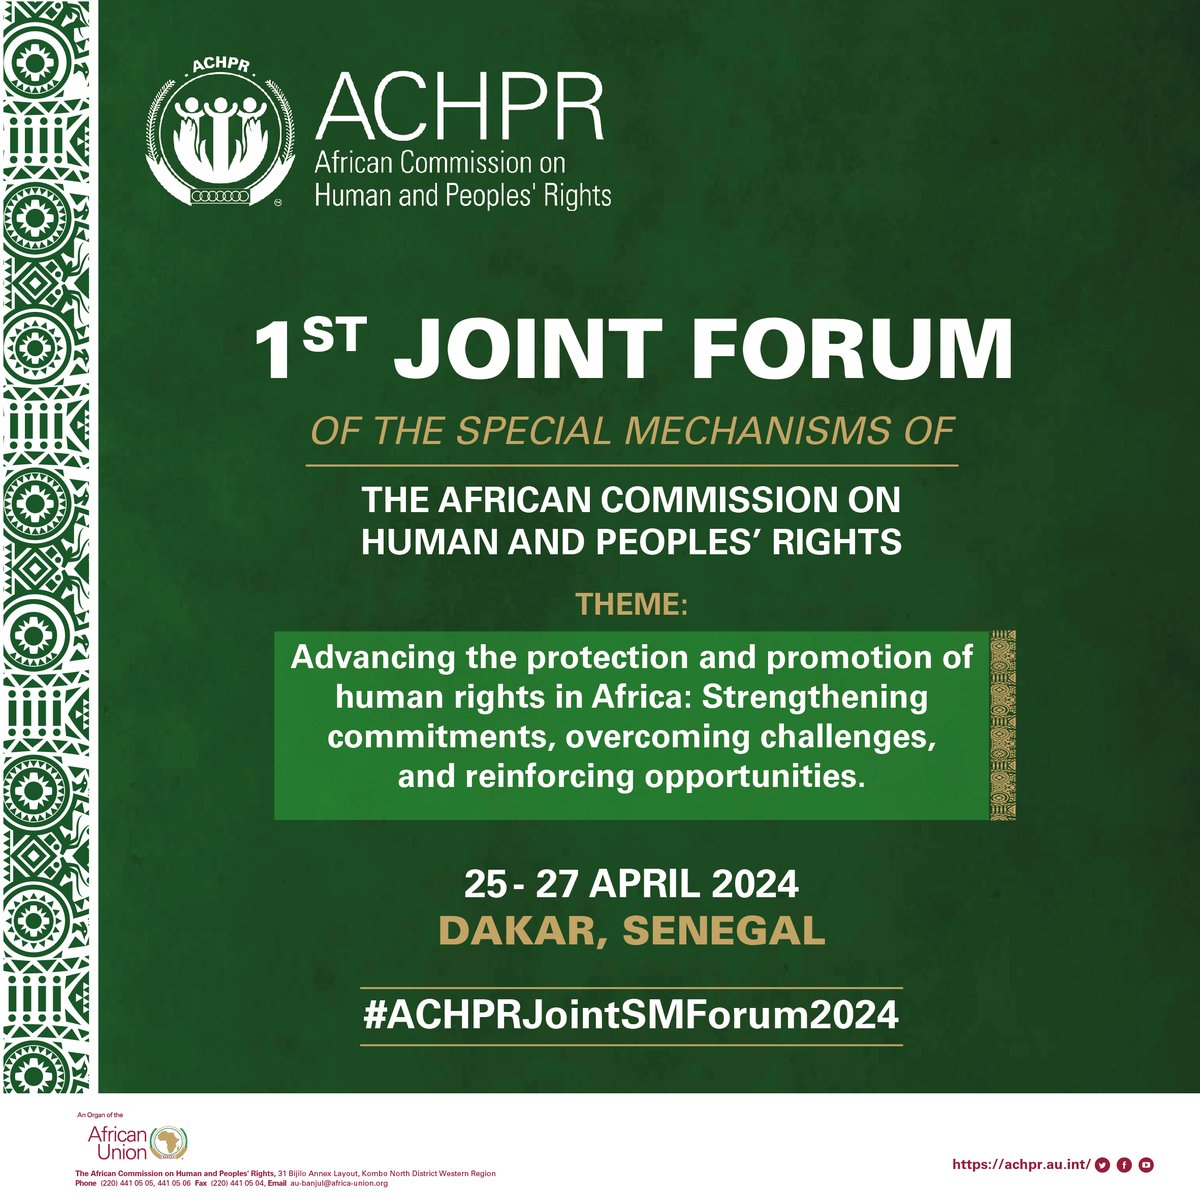 The ACHPR is hosting the first-ever Joint Forum of Special Mechanisms in Dakar from April 25th to 27th, 2024.The aim of this Forum is to deepen the ACHPR's intersectional approach to Human Rights.